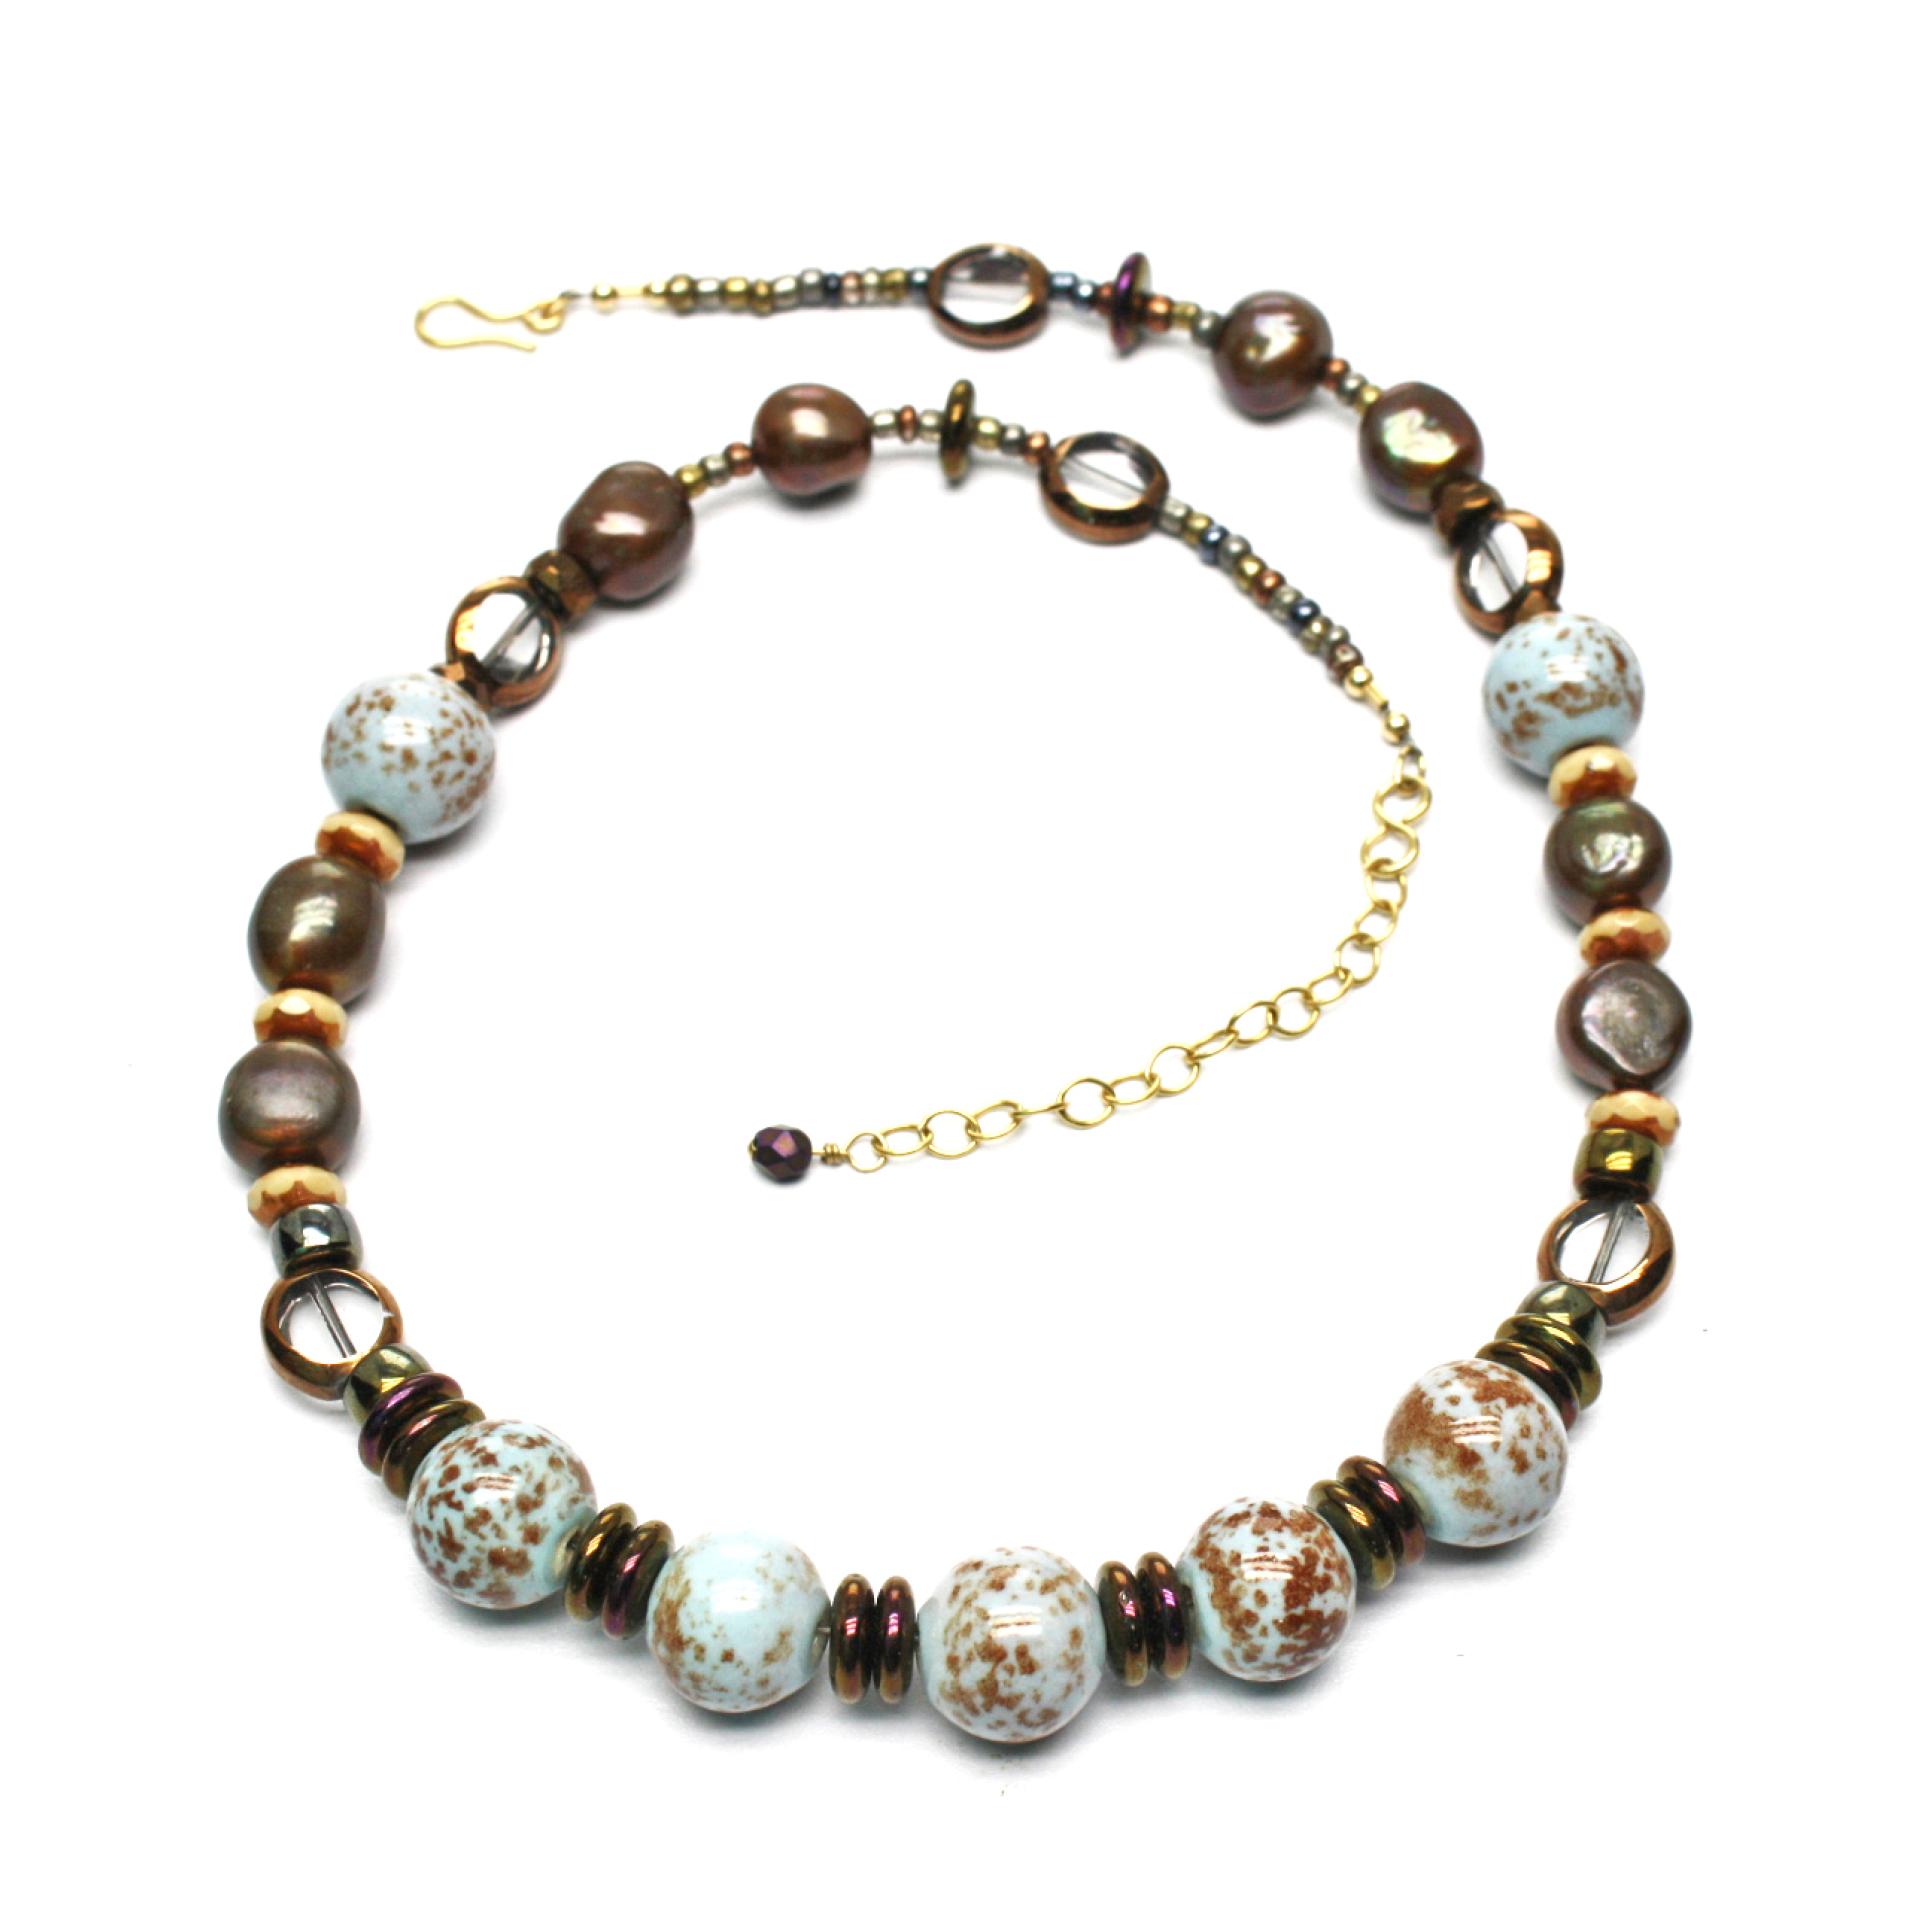 Blue and Brown Necklace, Chocolate Pearls